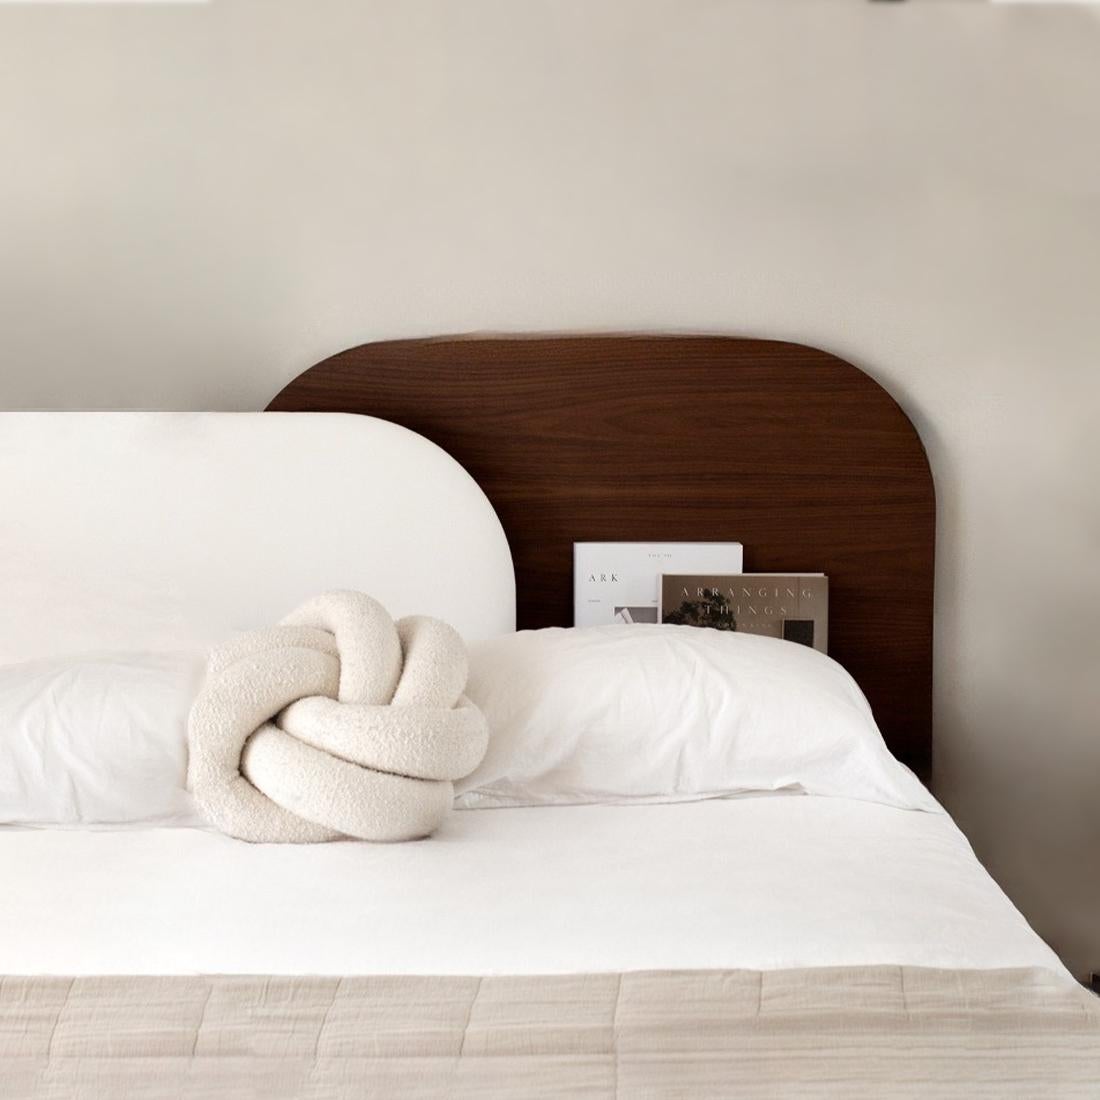 Our unique and best-selling ALBA Collection expands with the introduction of our ALBA Headboard. A piece that follows the exceptional design of its collection and perfectly complements our Alba Bedside Tables and Shelves.


The word ALBA means